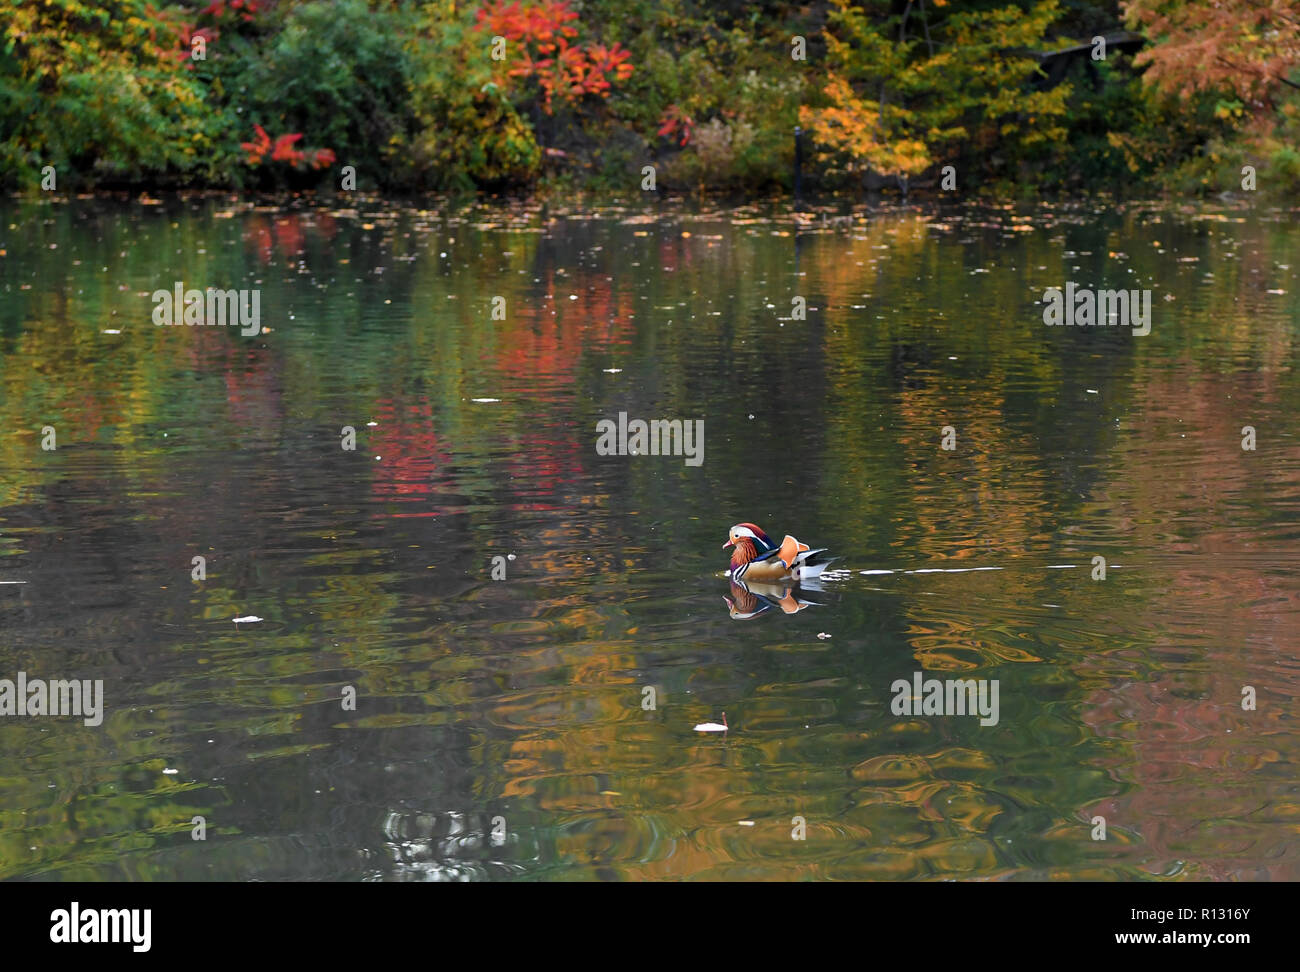 New York, USA. 8th Nov, 2018. A Mandarin duck paddles on a pond at the Central Park in New York, the United States, on Nov. 8, 2018. Mandarin ducks are native to East Asia and renowned for their dazzling multicolored feathers. This rare Mandarin duck, first spotted in early October, has become a new star at the Central Park, one of New York City's most-visited attractions. Credit: Li Rui/Xinhua/Alamy Live News Stock Photo